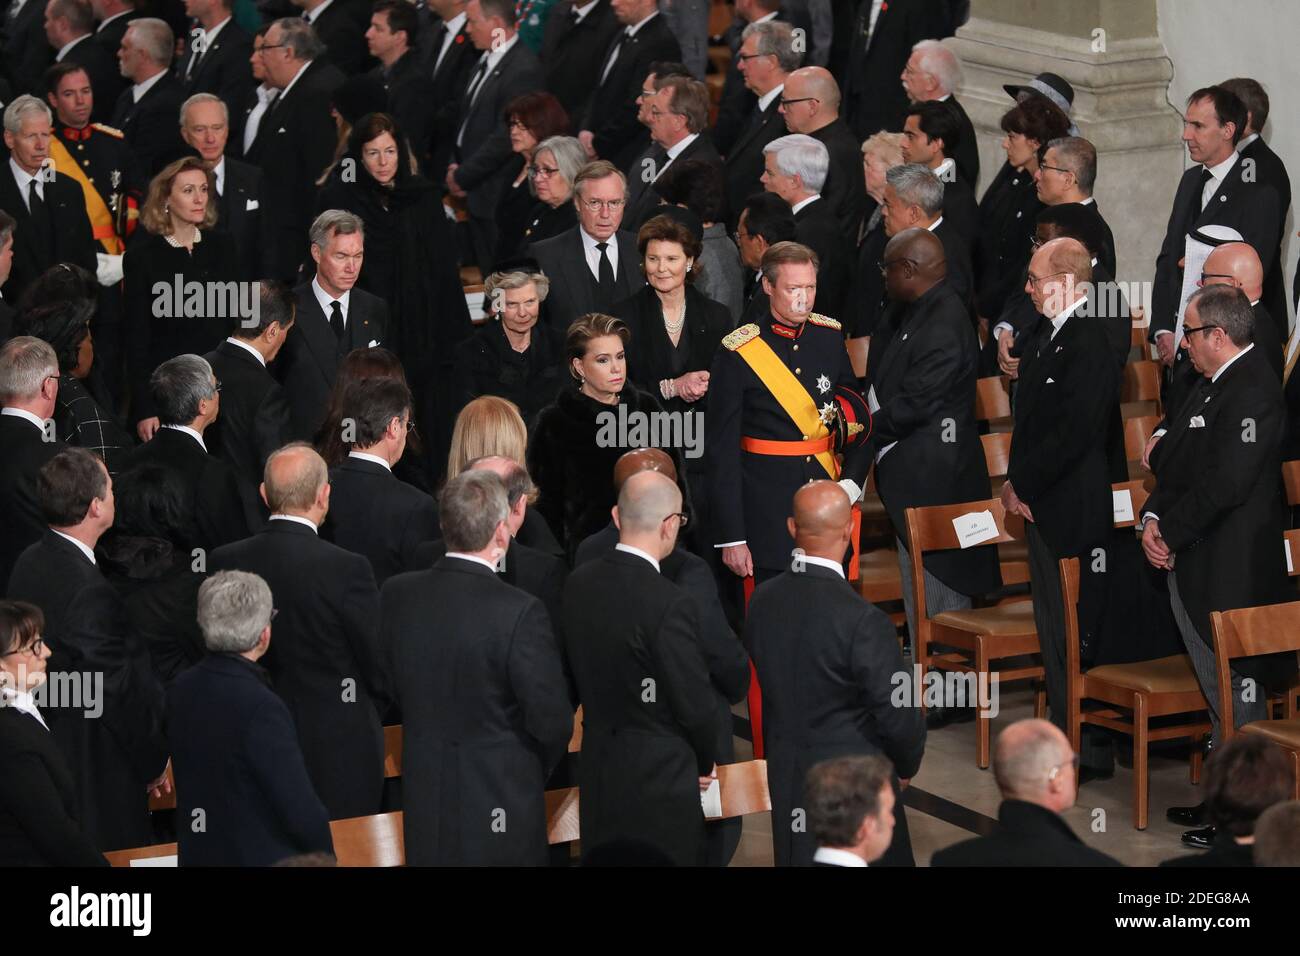 Royal family of Luxembourg at funeral of Grand Duke Jean of Luxembourg at Cathedral Notre-Dame of Luxembourg in Luxembourg City, Luxembourg on May 4, 2019. Photo by Guy Wolff/Luxemburger Wort/Pool/ABACAPRESS.COM Stock Photo